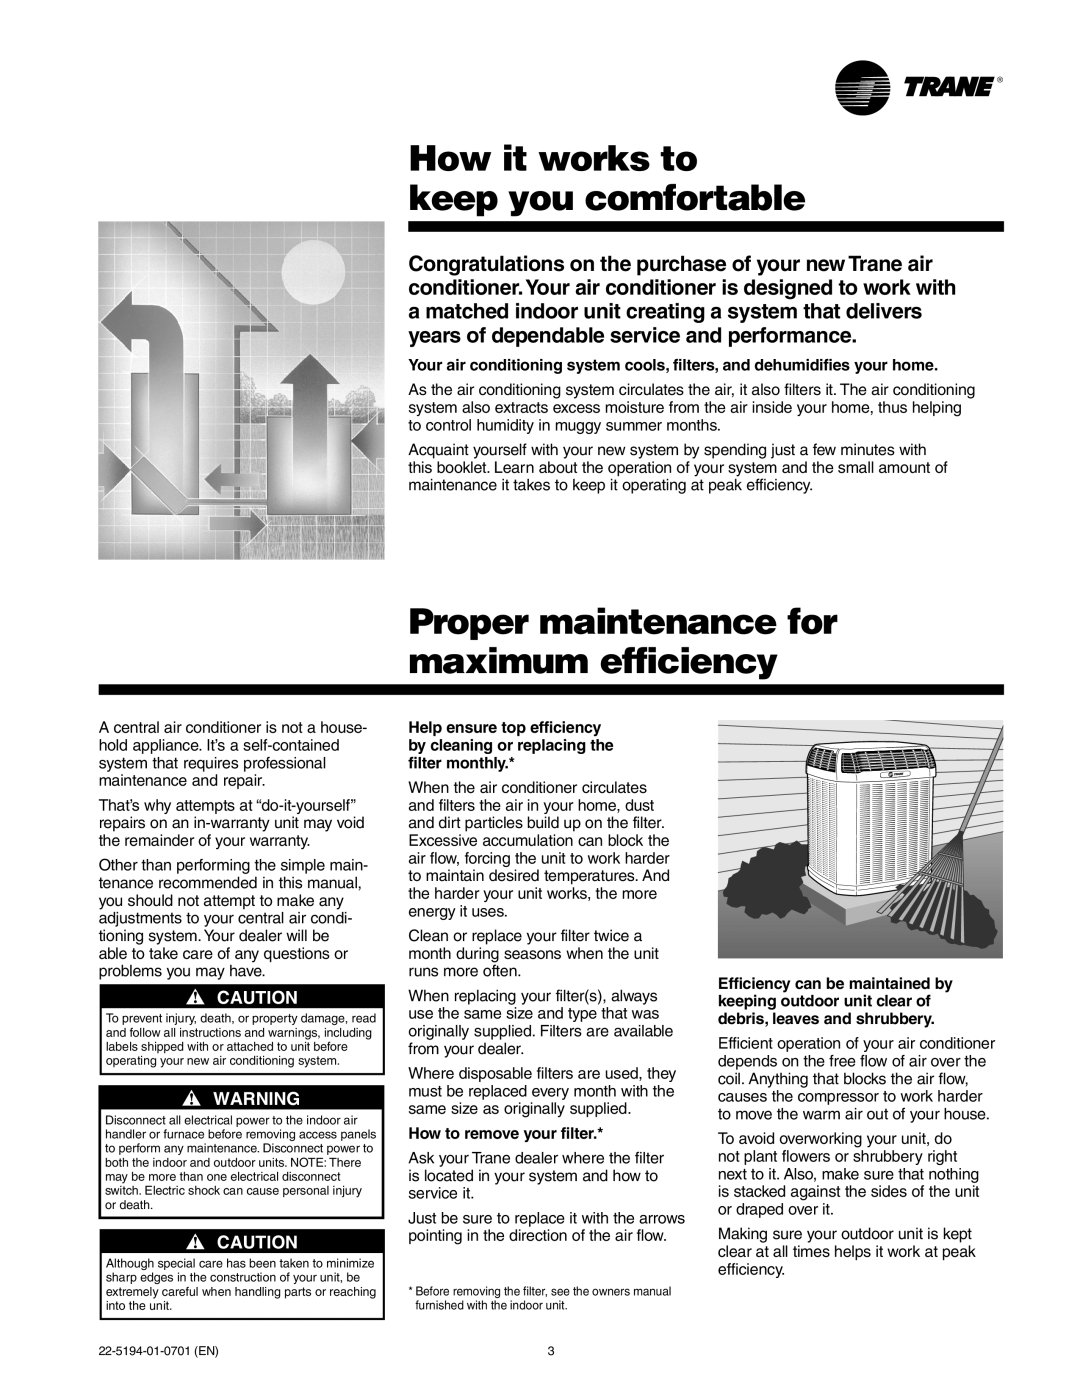 Trane XL manual How it works to keep you comfortable, Proper maintenance for maximum efficiency 